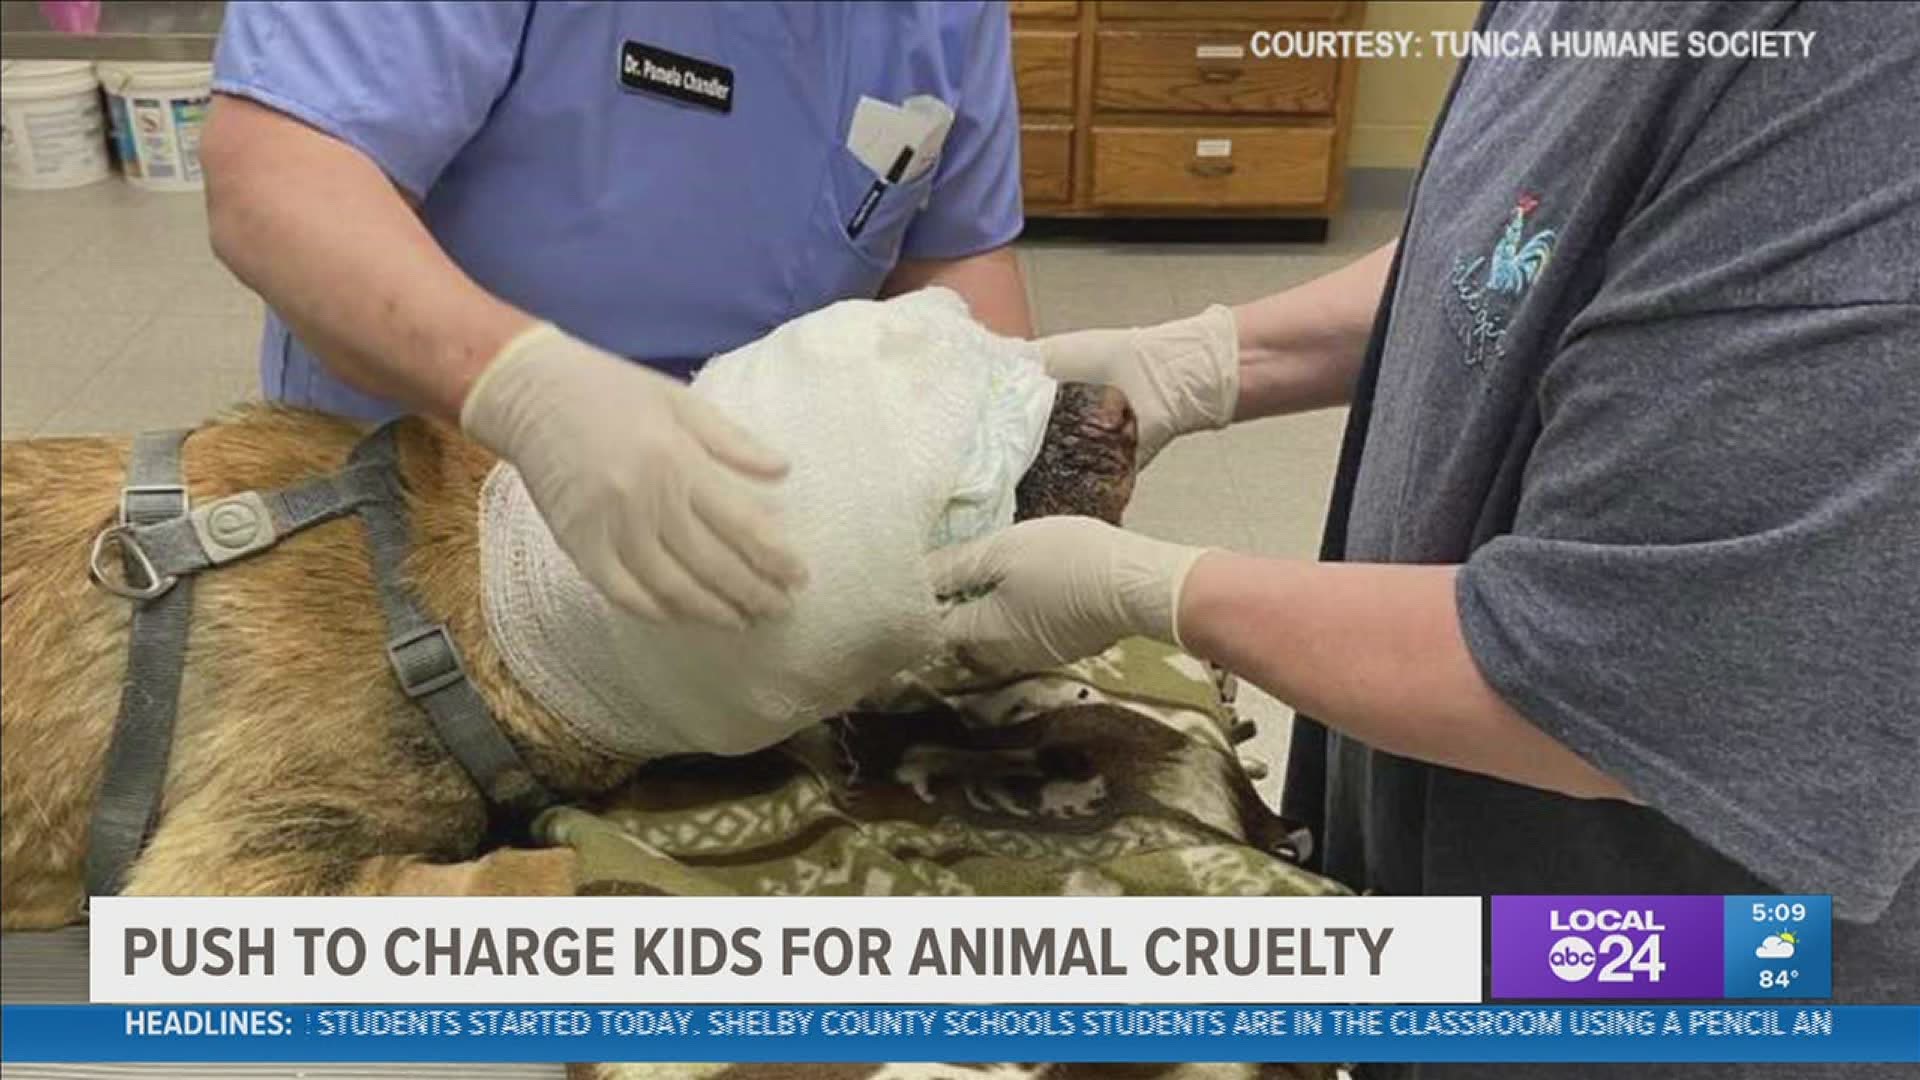 In a Facebook post, Tate County Sheriff Brad Lance said he couldn't charge the child with felony animal cruelty because the child wasn't an adult.